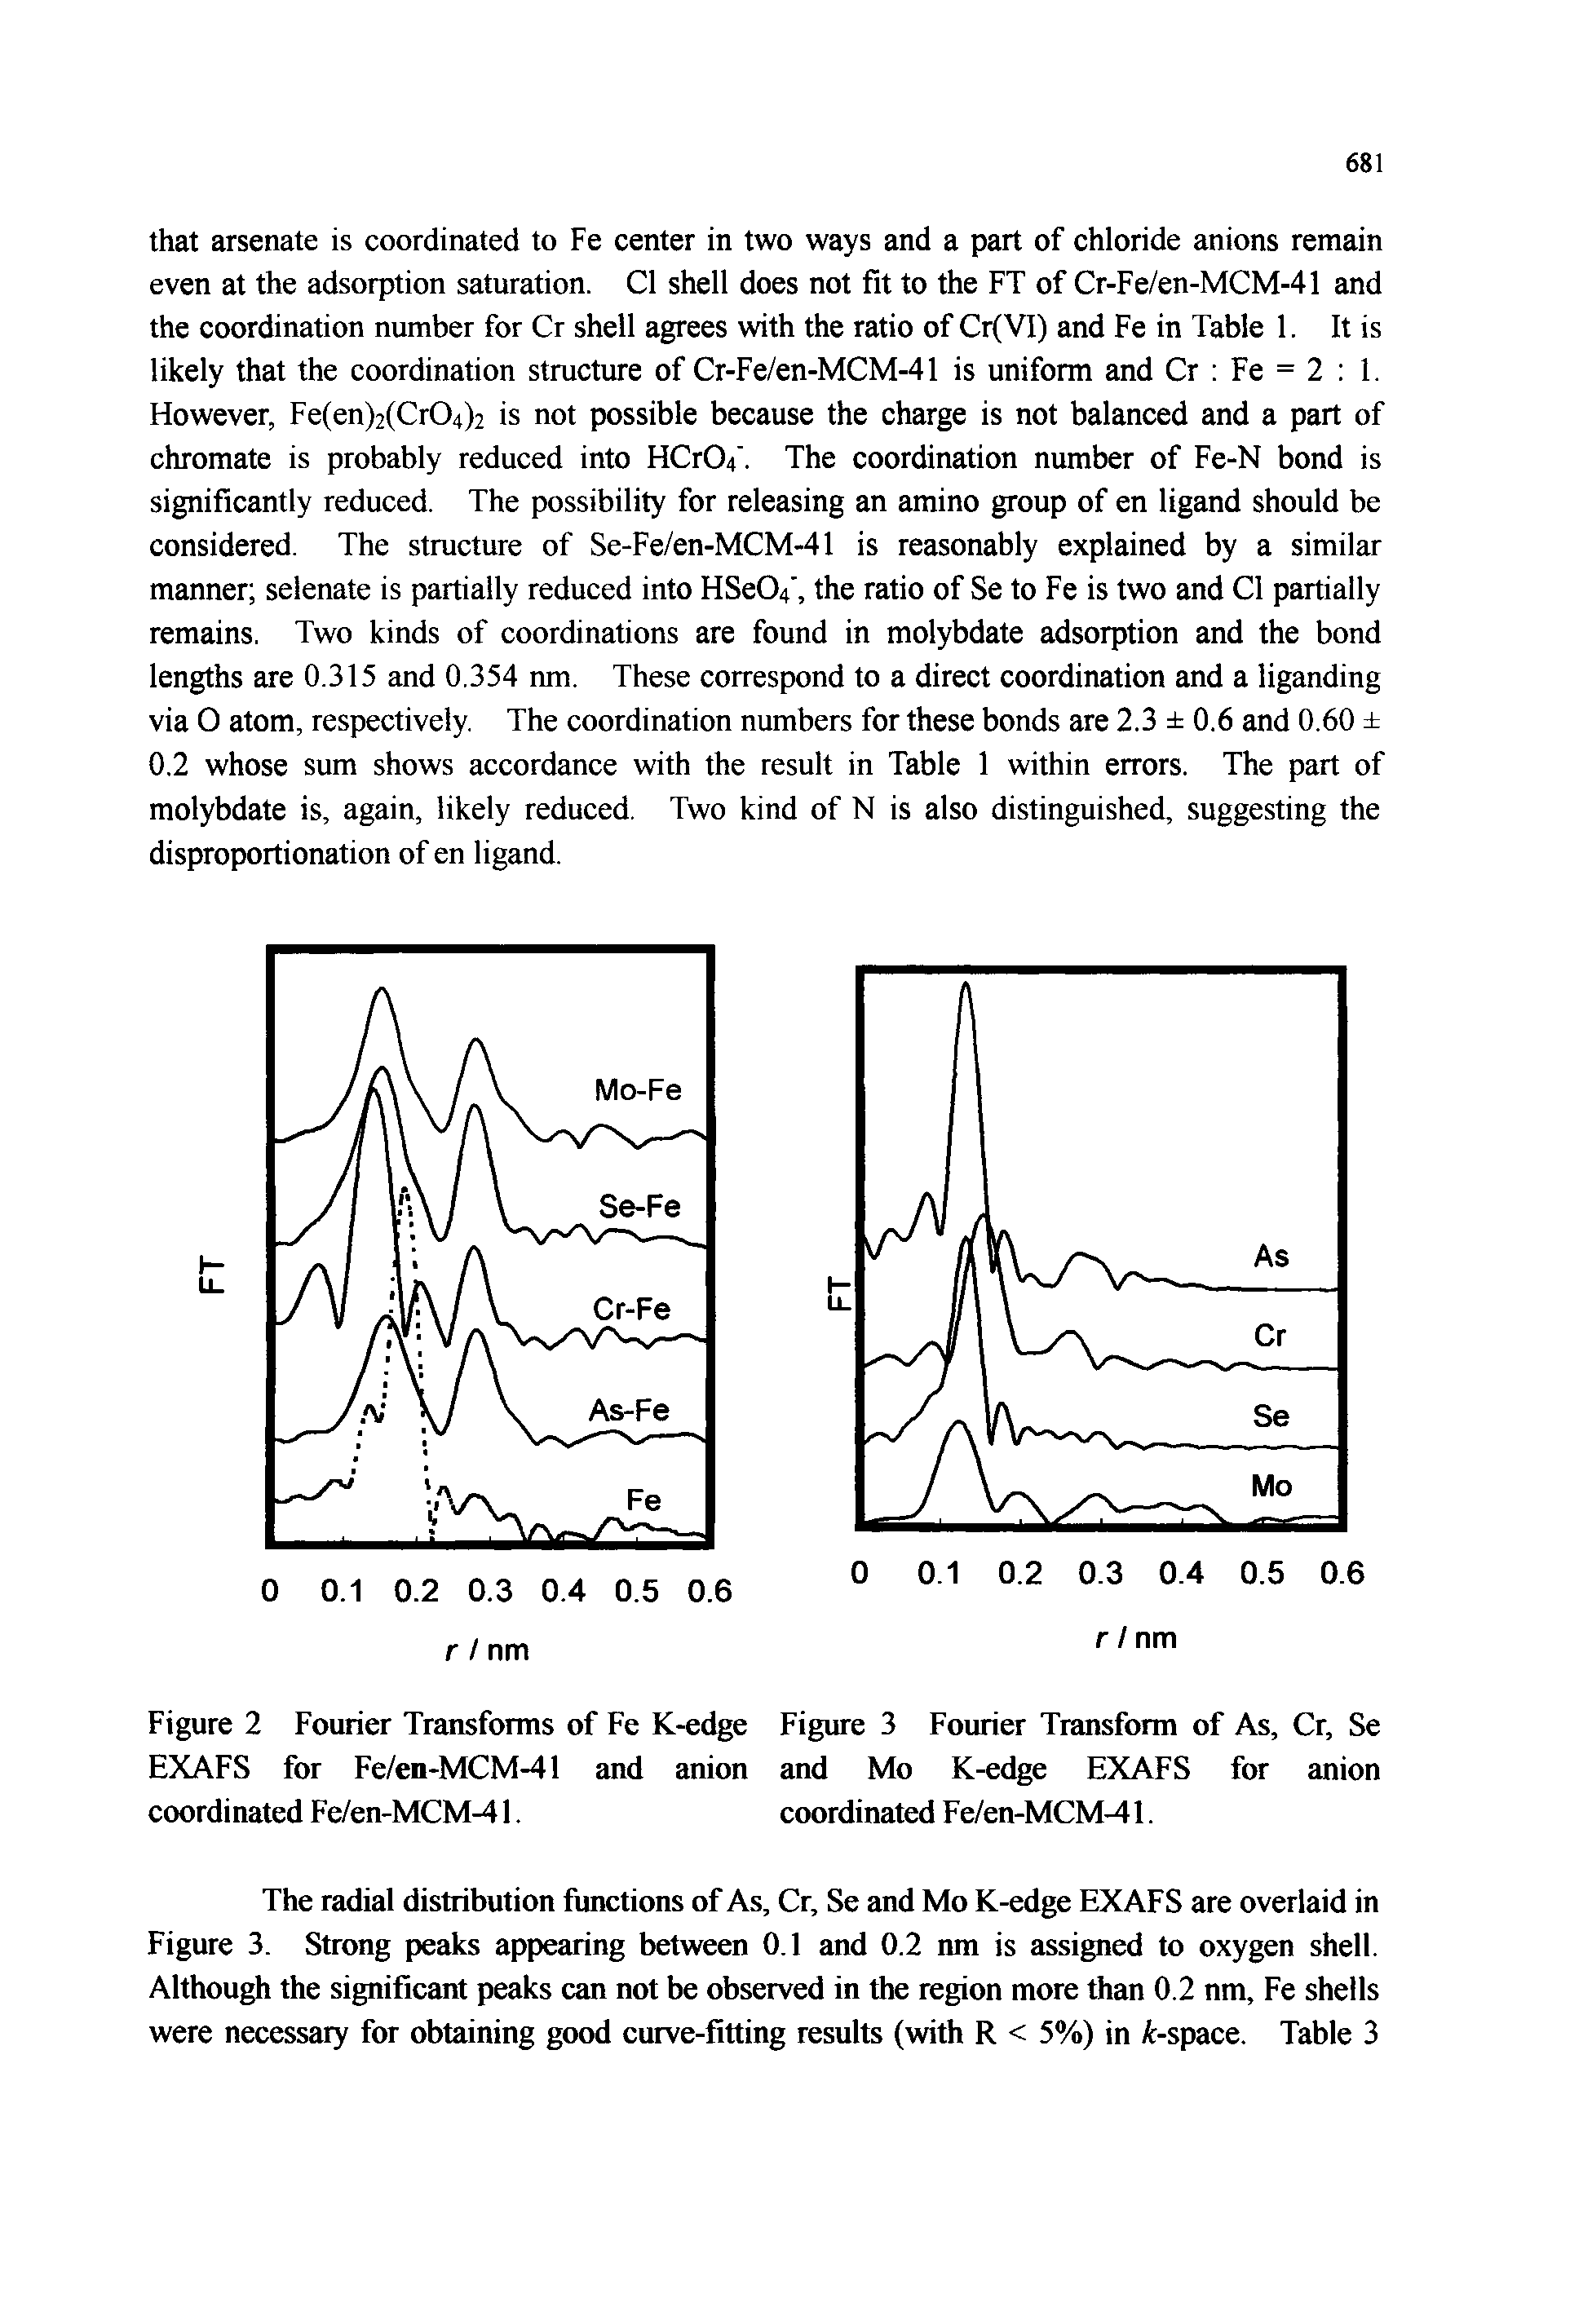 Figure 2 Fourier Transforms of Fe K-edge Figure 3 Fourier Transform of As, Cr, Se EXAFS for Fe/en-MCM-41 and anion and Mo K-edge EXAFS for anion coordinated Fe/en-MCM-41. coordinated Fe/en-MCM-41.